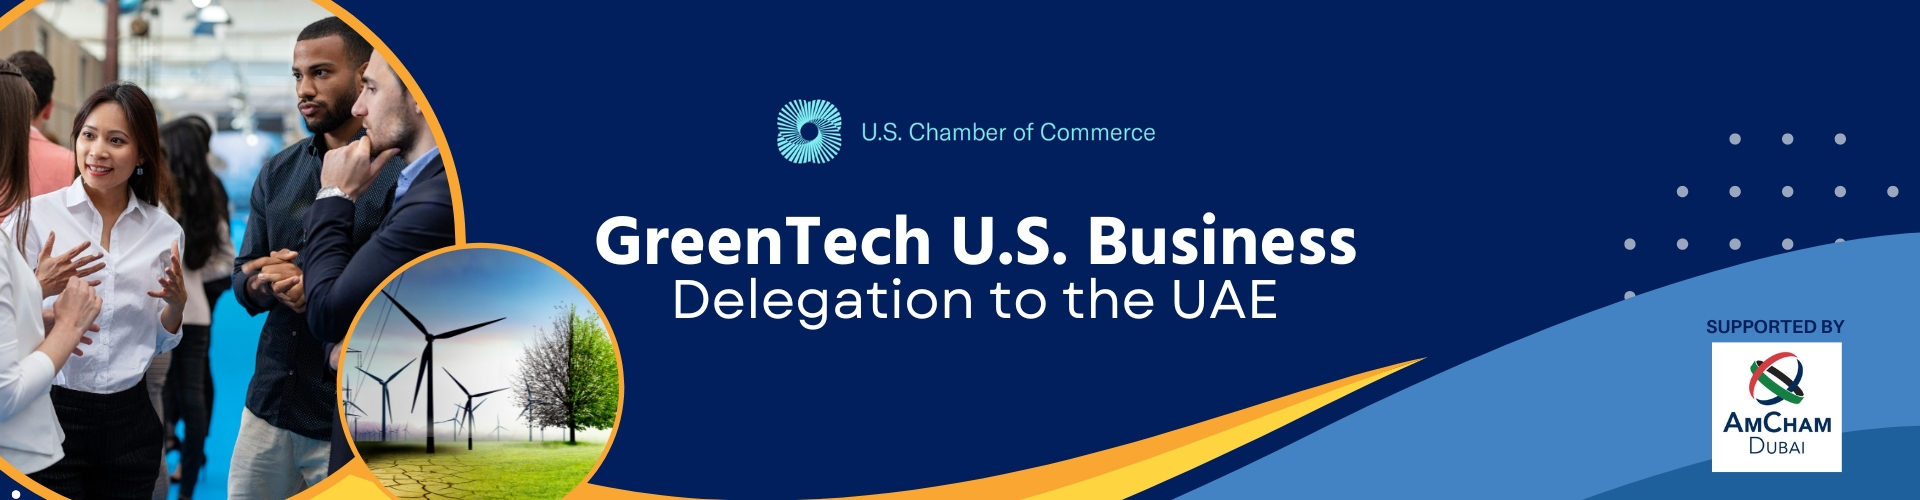 thumbnails US Chamber of Commerce- GreenTech U.S. Business Delegation to the United Arab Emirates